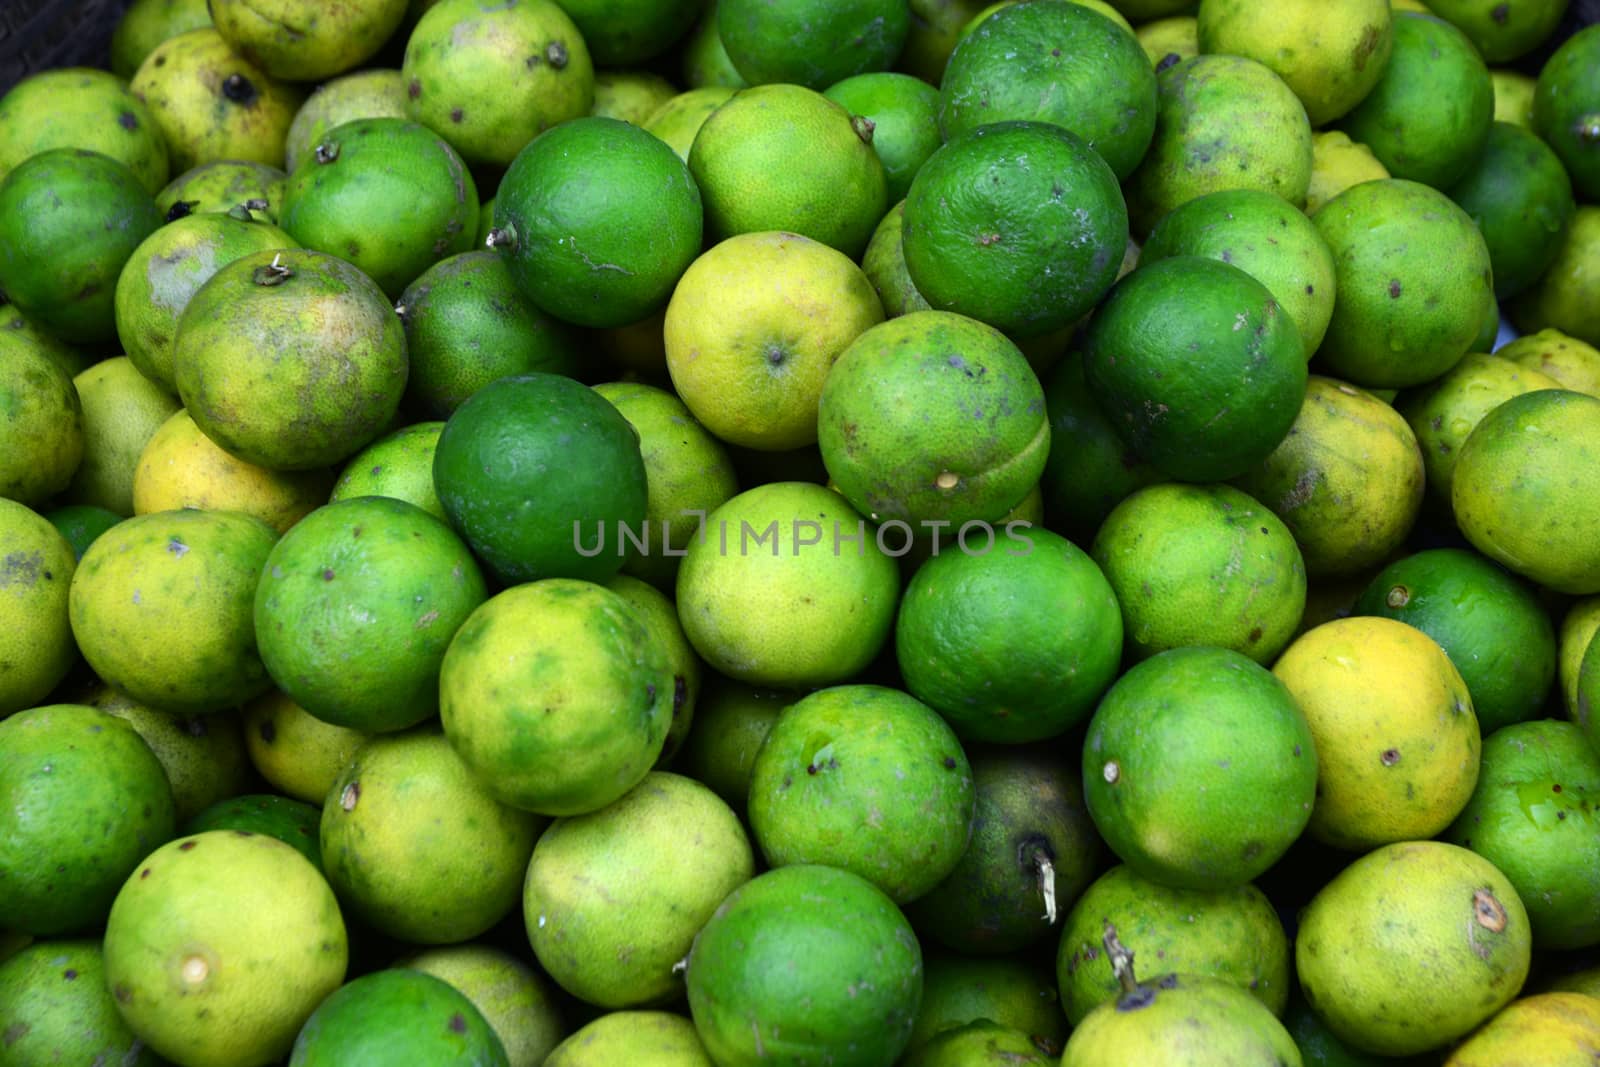 Lime, also traditionally known as lime green